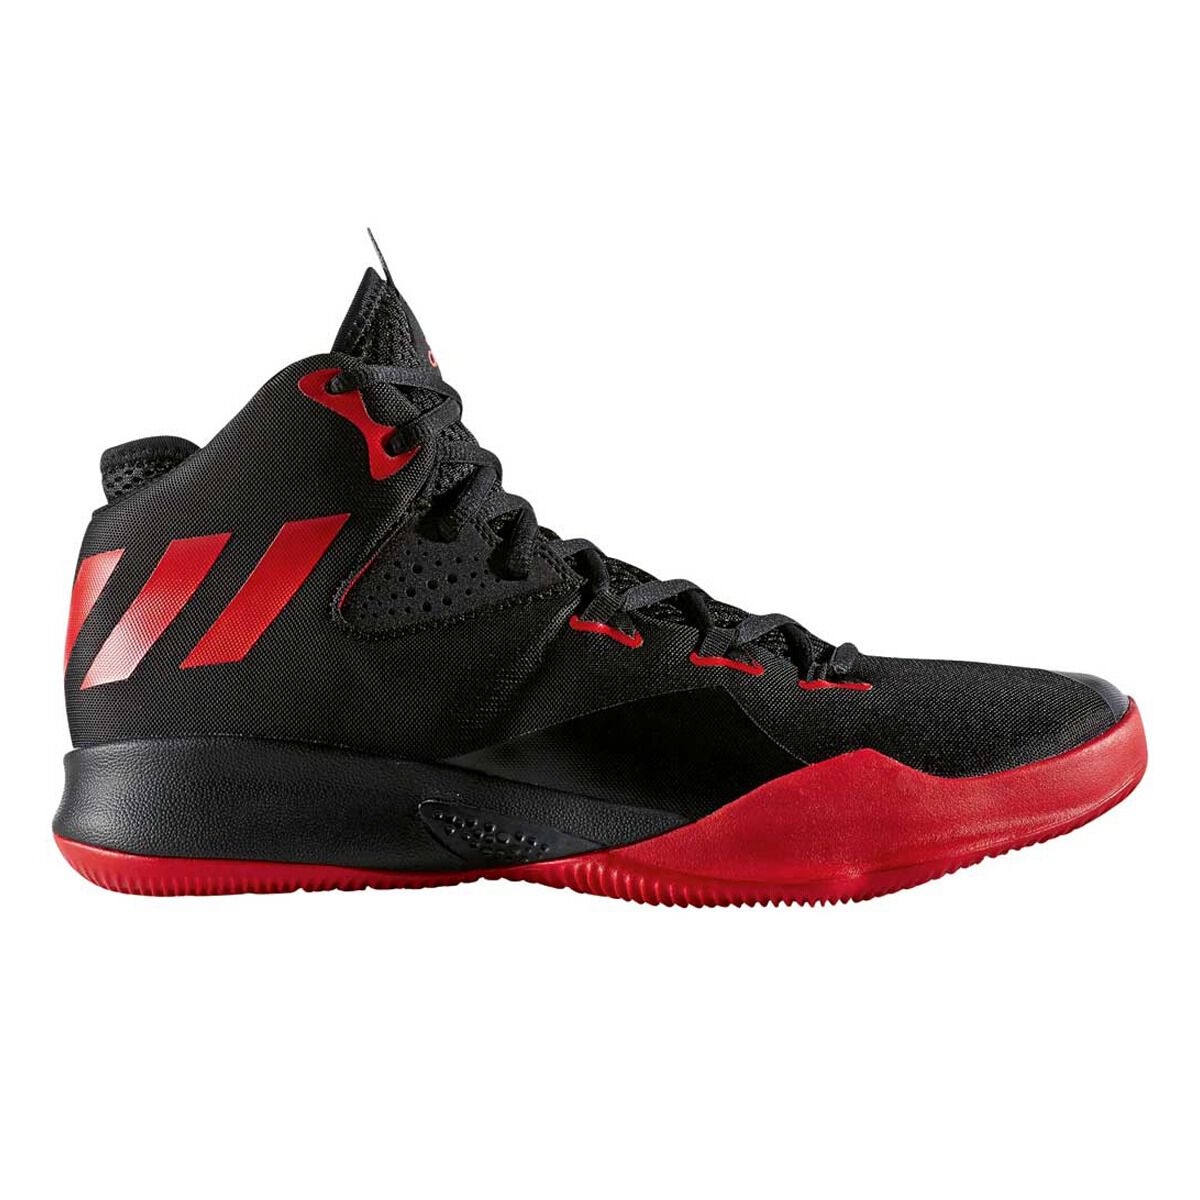 black and red adidas basketball shoes